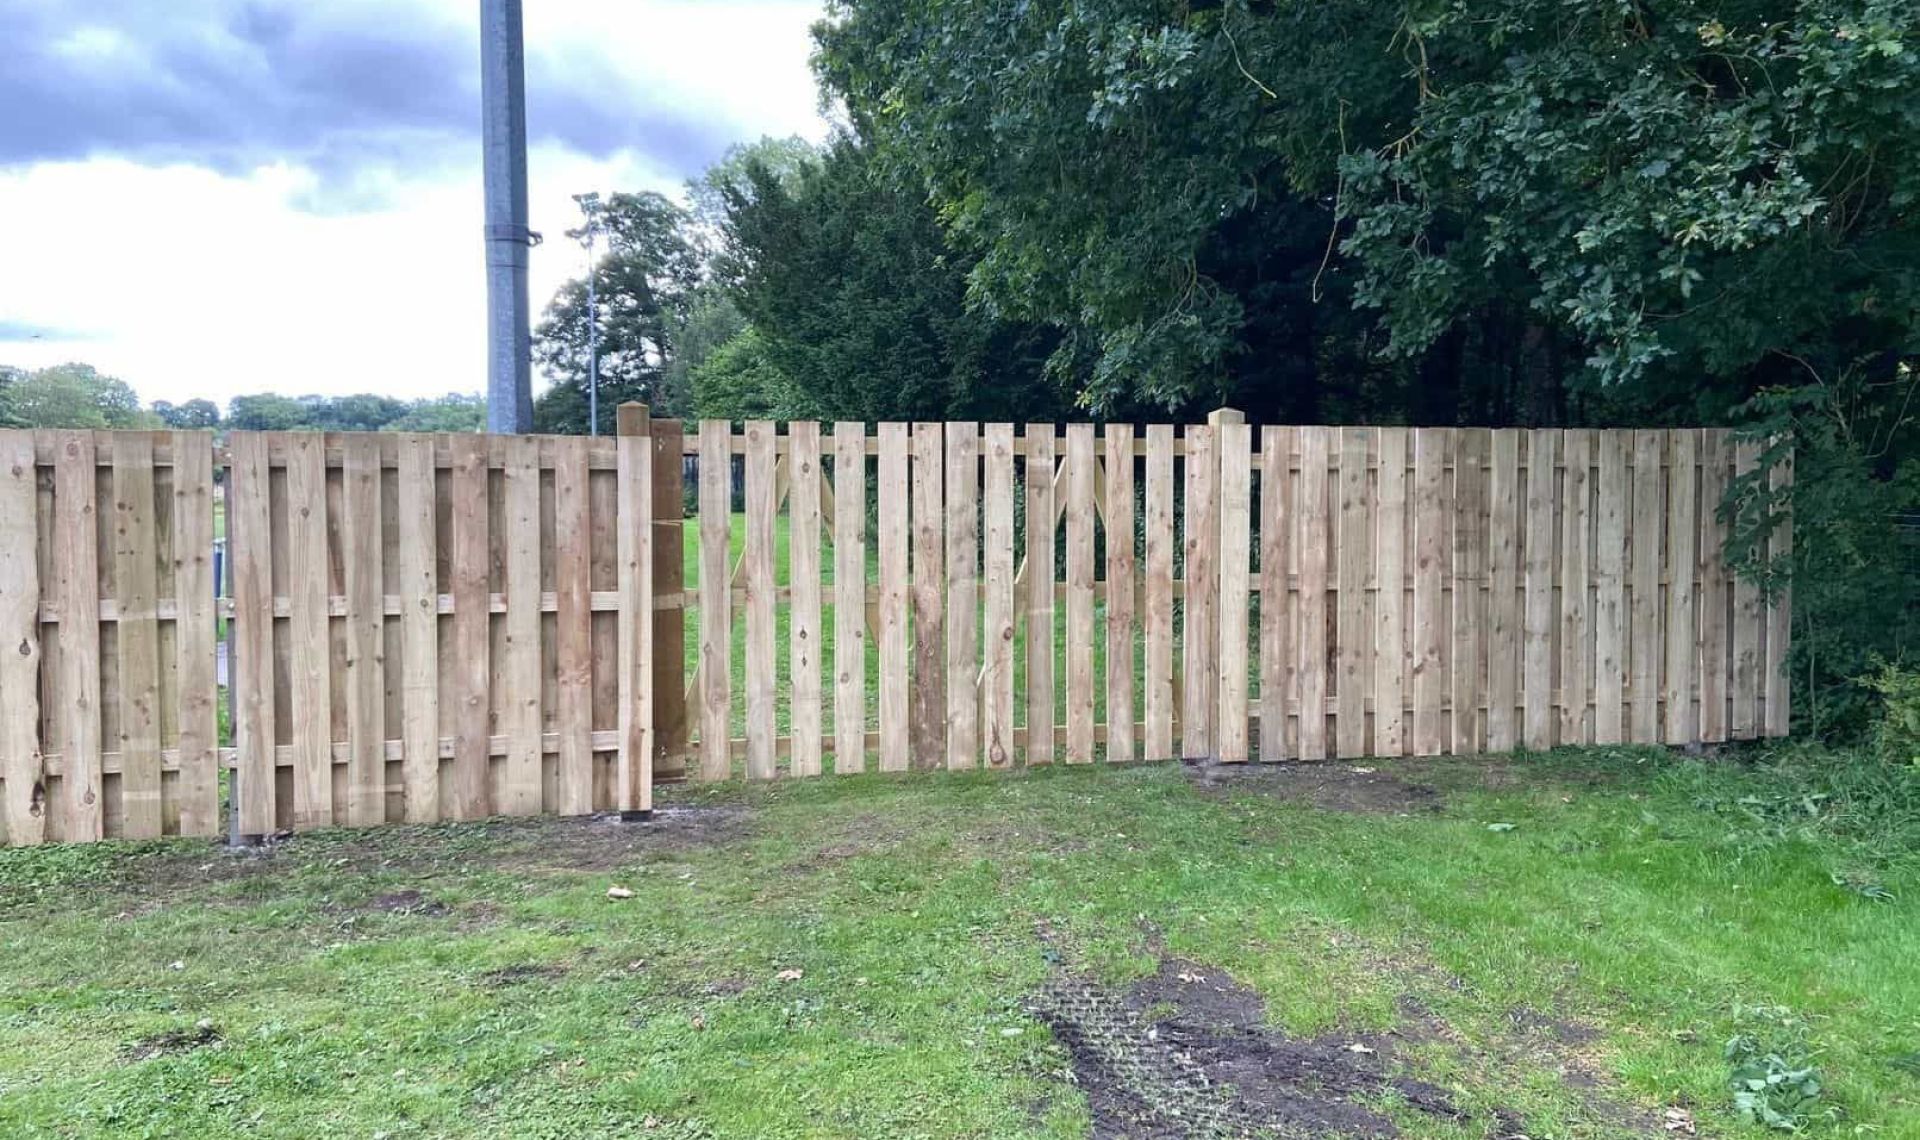 Fencing at amesbury football club. Close up of wooden gate.